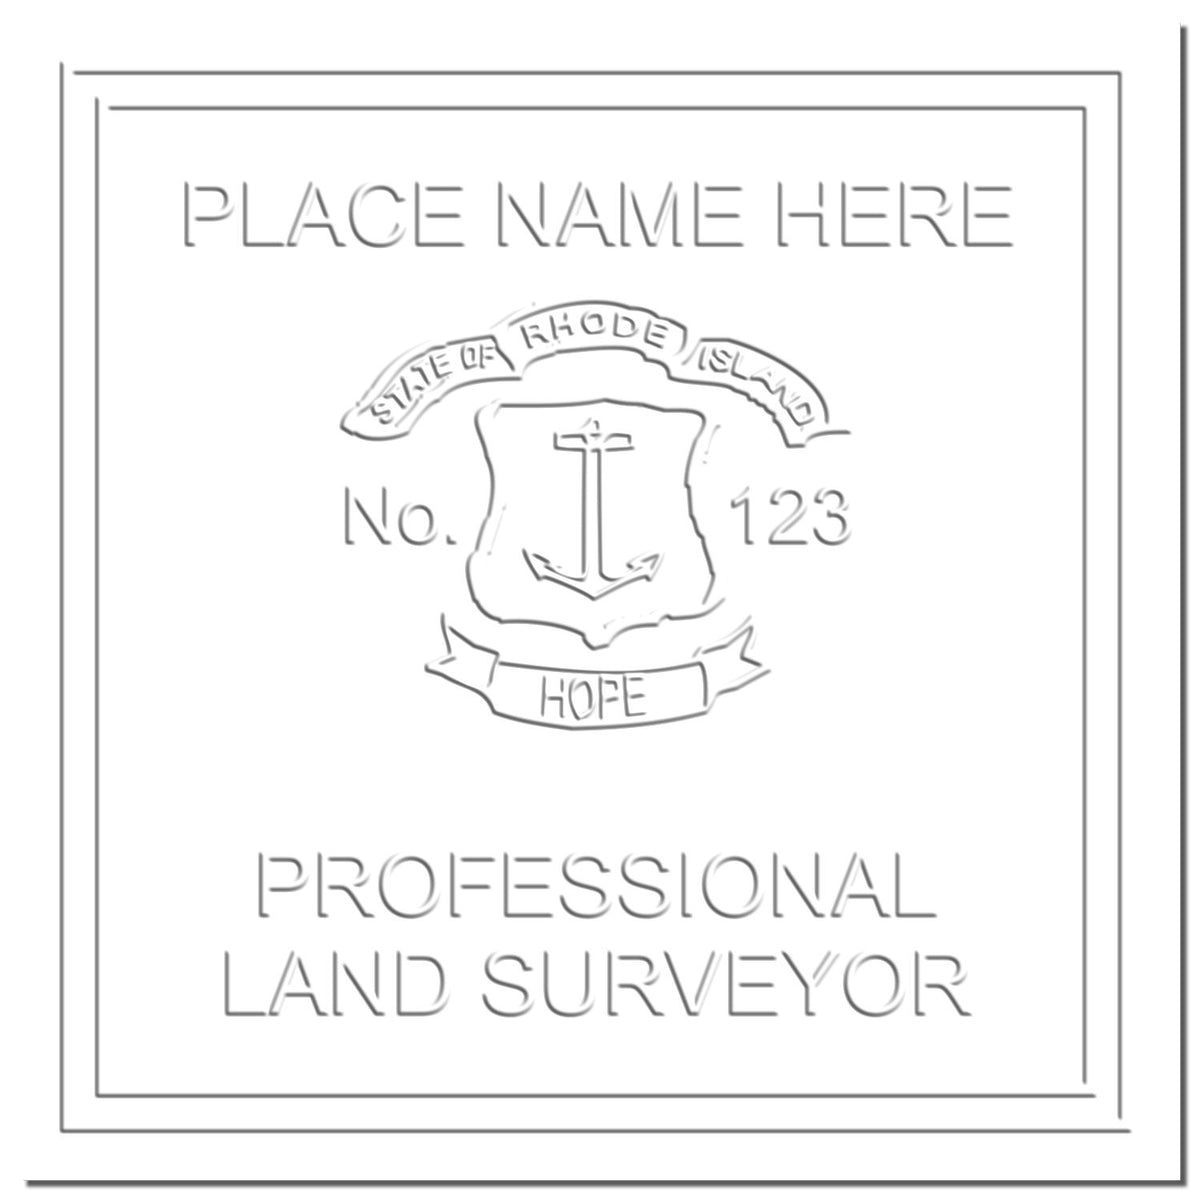 This paper is stamped with a sample imprint of the Gift Rhode Island Land Surveyor Seal, signifying its quality and reliability.